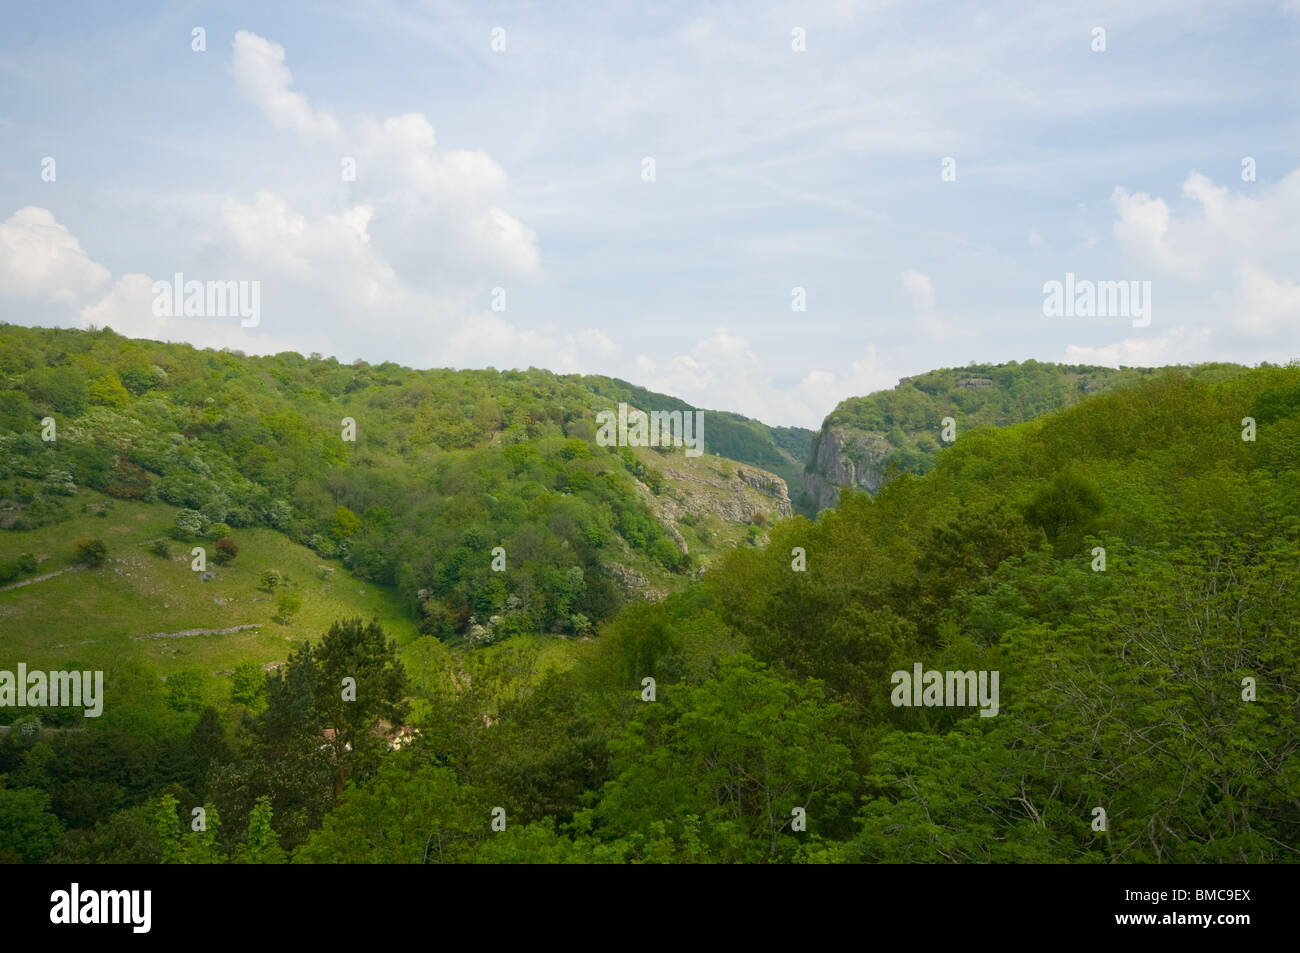 A View Over The Gorge From The Lookout Tower At The Top Of Cheddar Gorge Somerset England Stock Photo